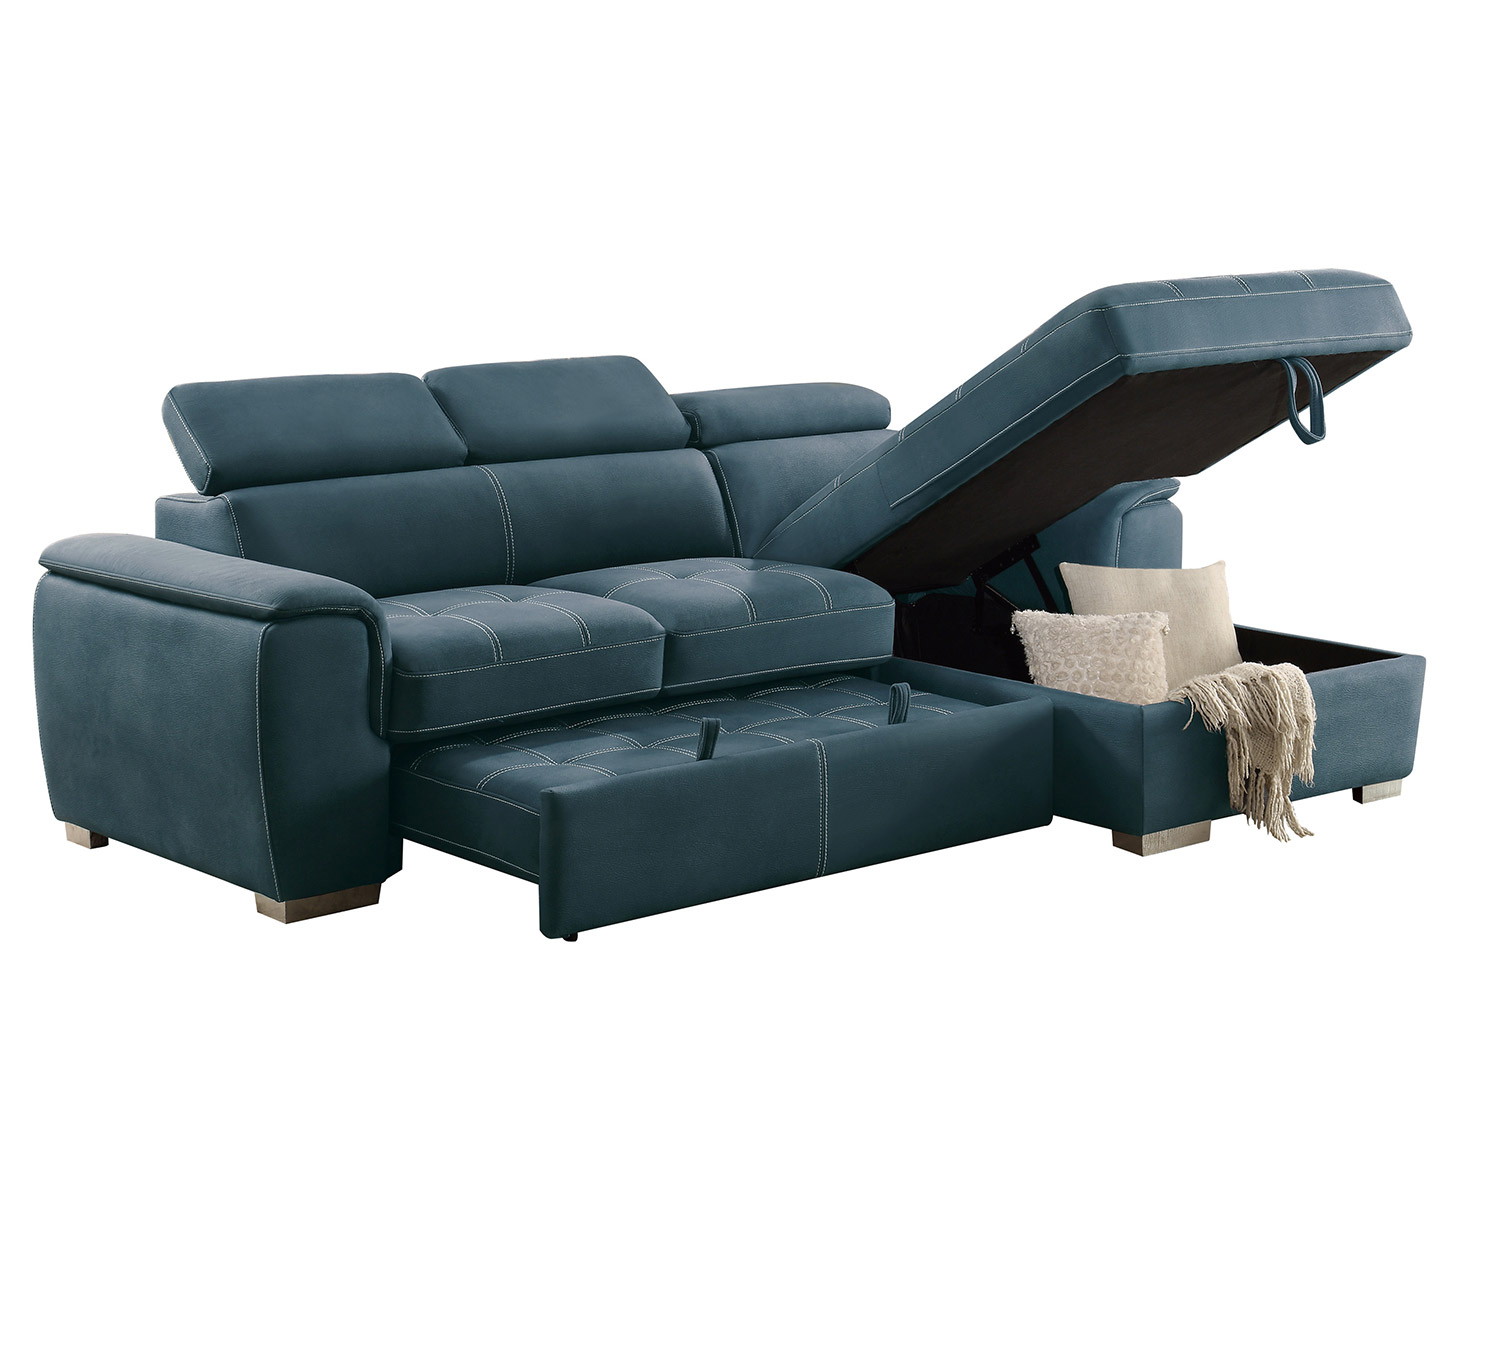 Homelegance Ferriday Sectional with Pull-out Bed and Hidden Storage - Blue